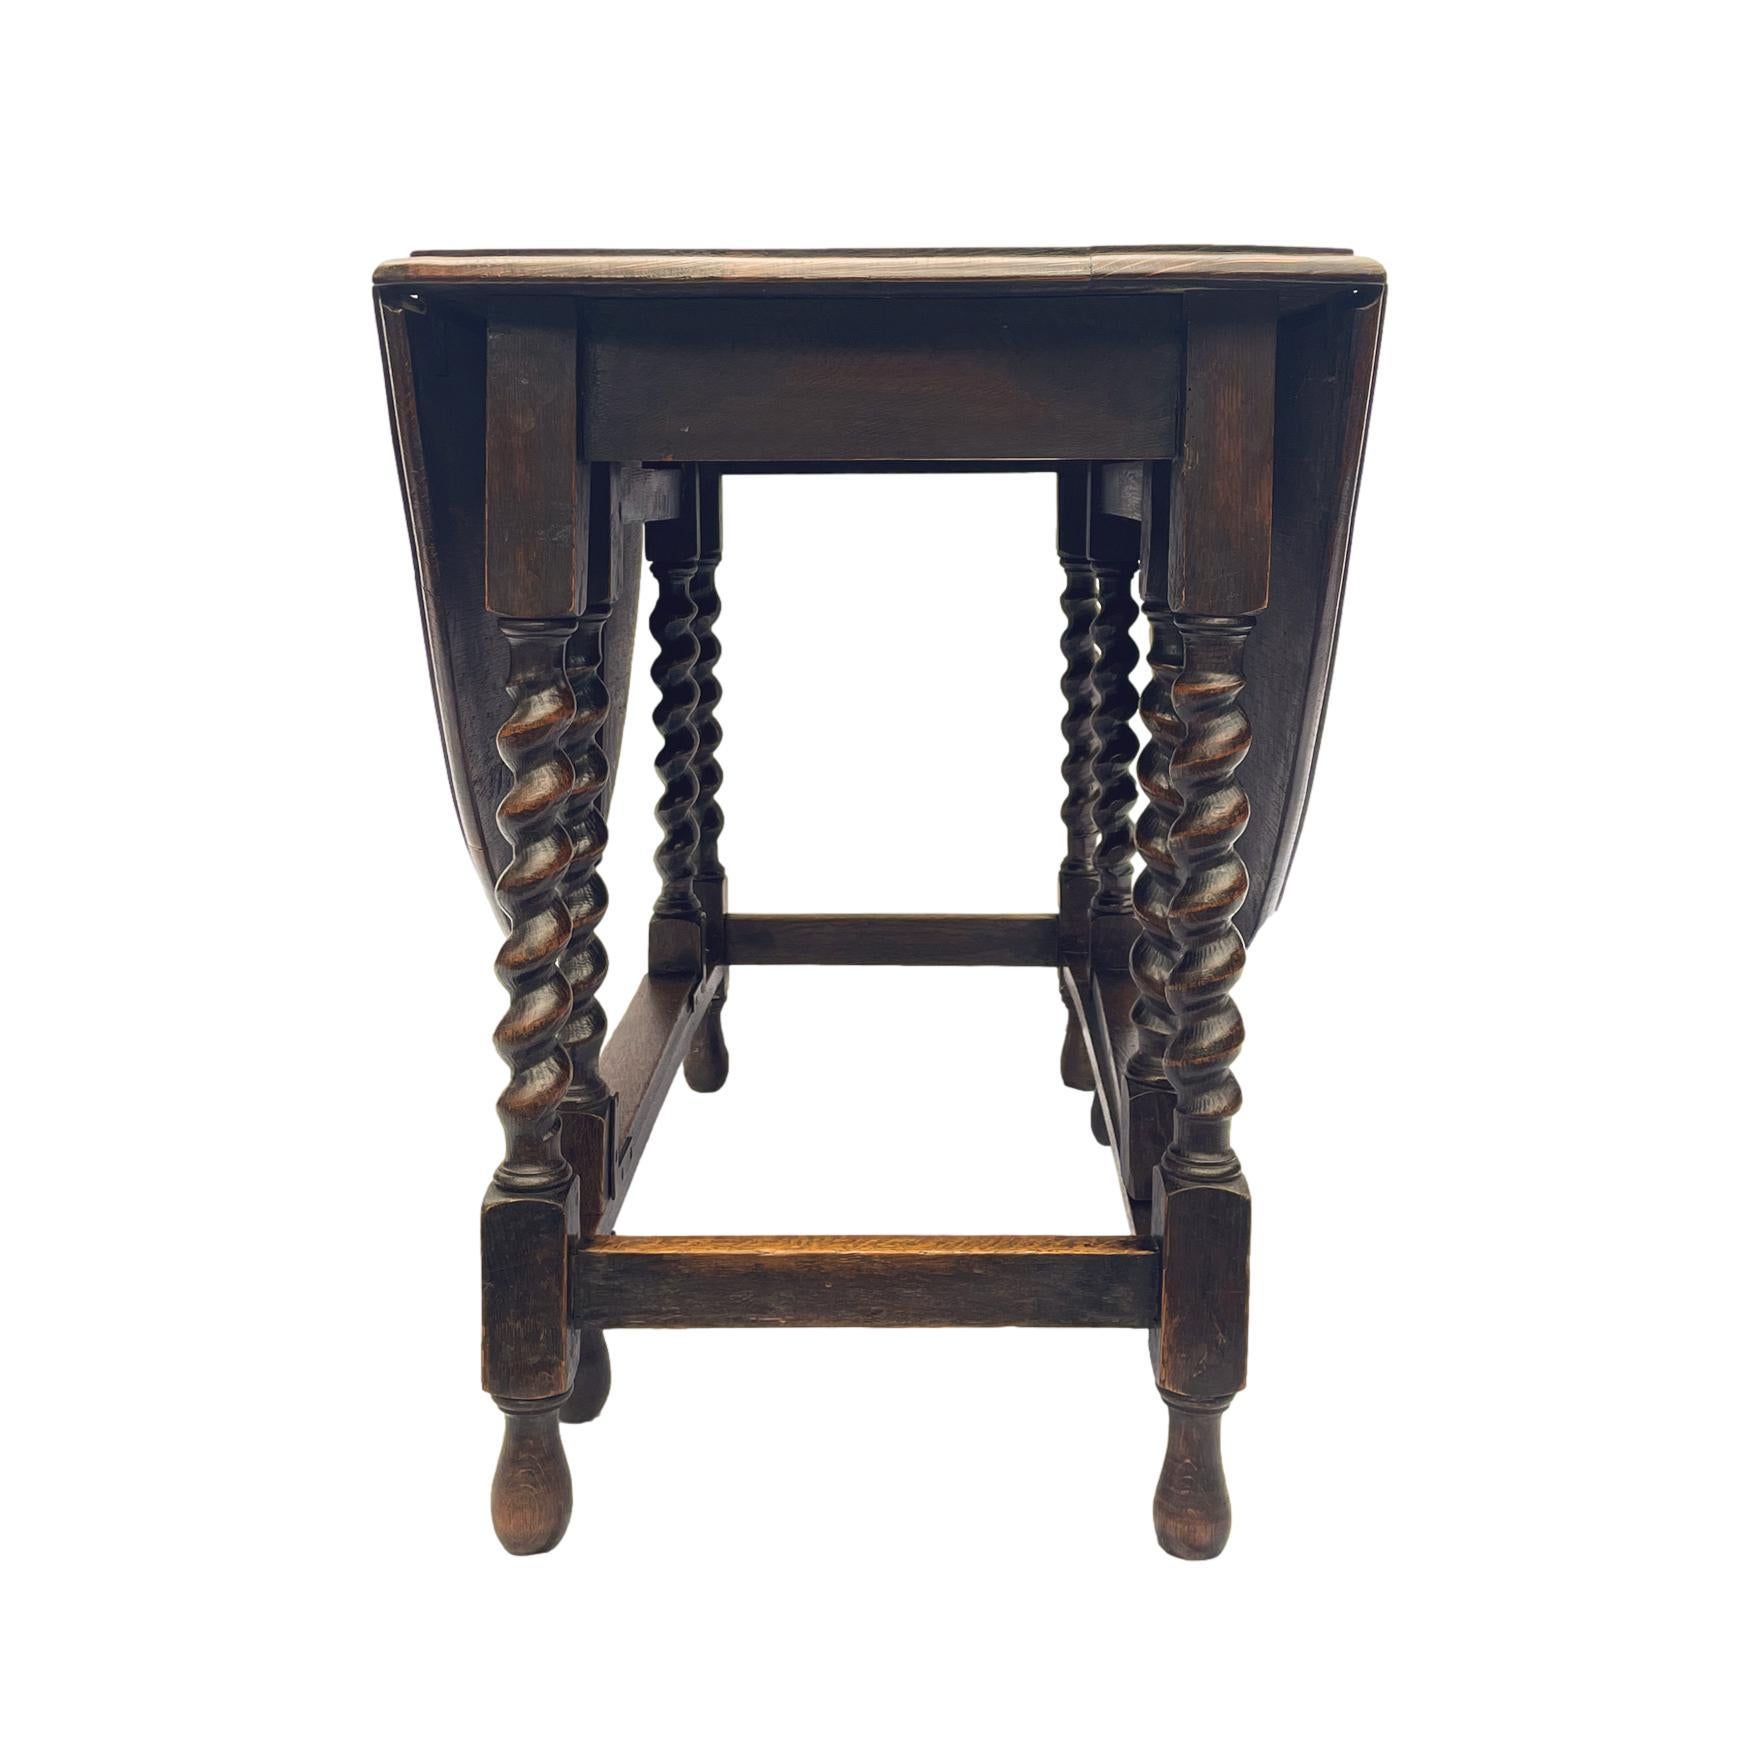 Hand-Carved Oak Barley Twist Drop-Leaf Table with a Carved Top, English, circa 1920 For Sale